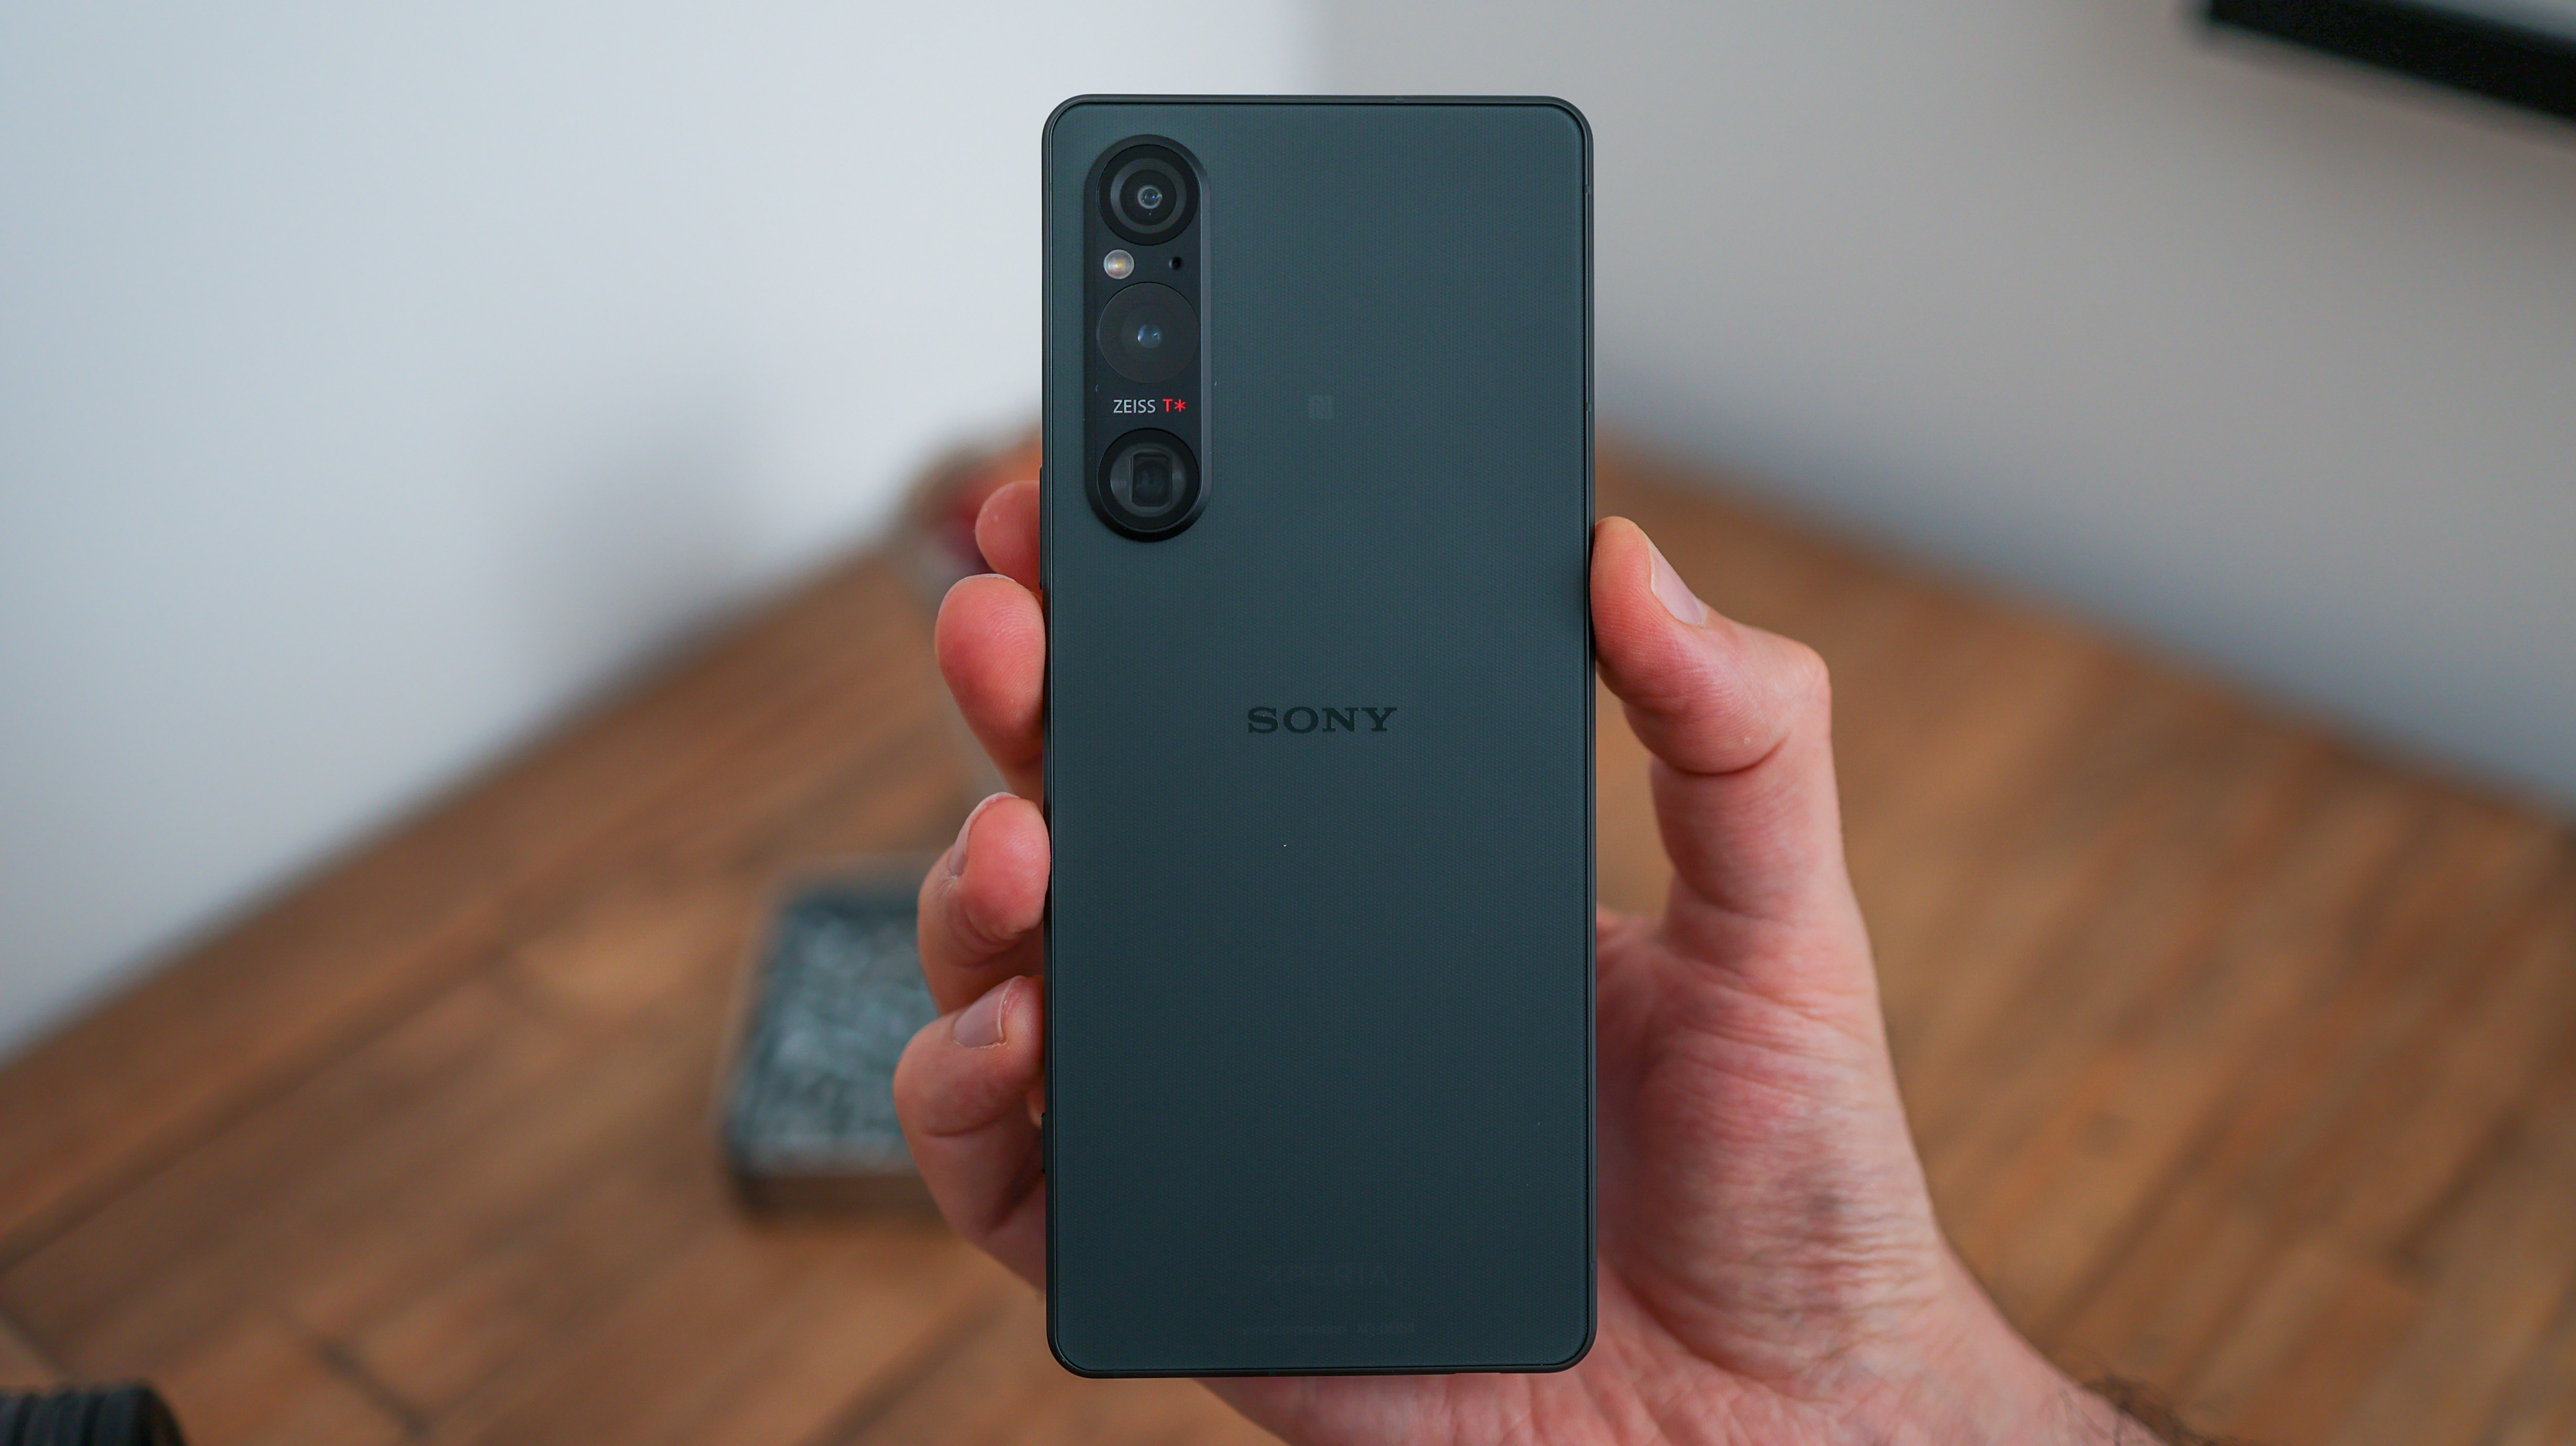 Sony Xperia 1 V review: the good, the niche and the pricey